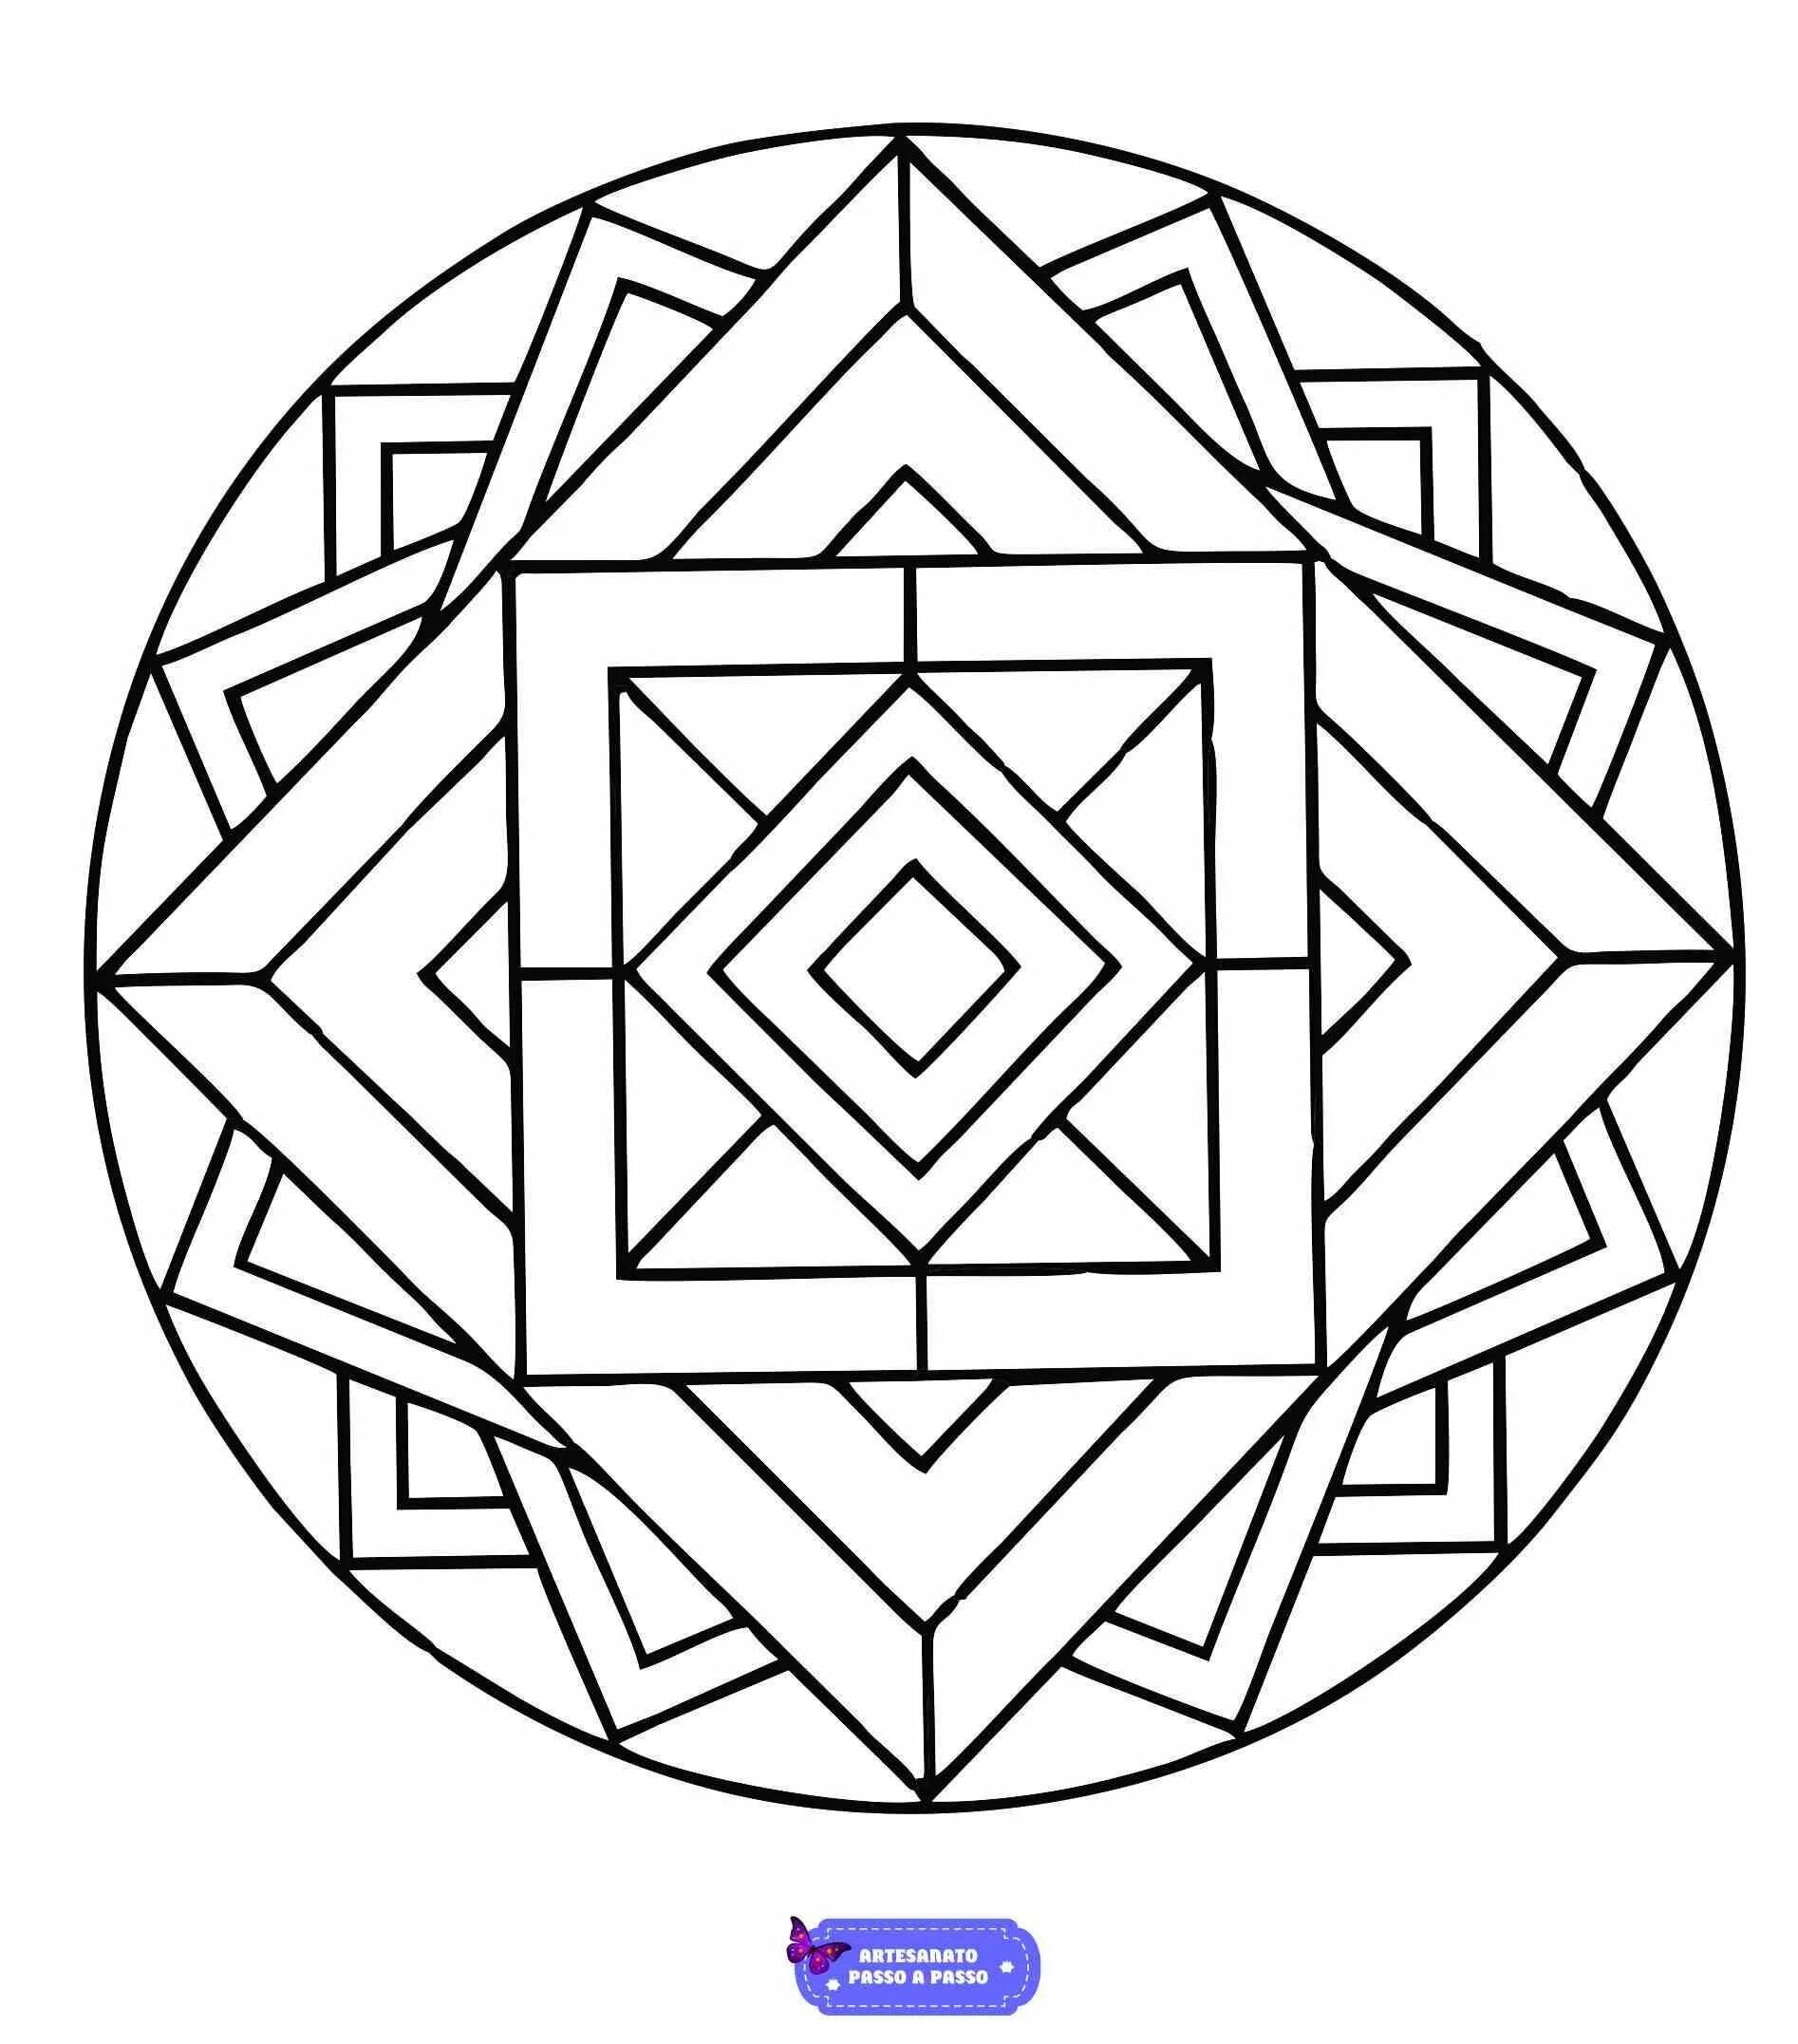 Coloring page with innovative geometric pattern